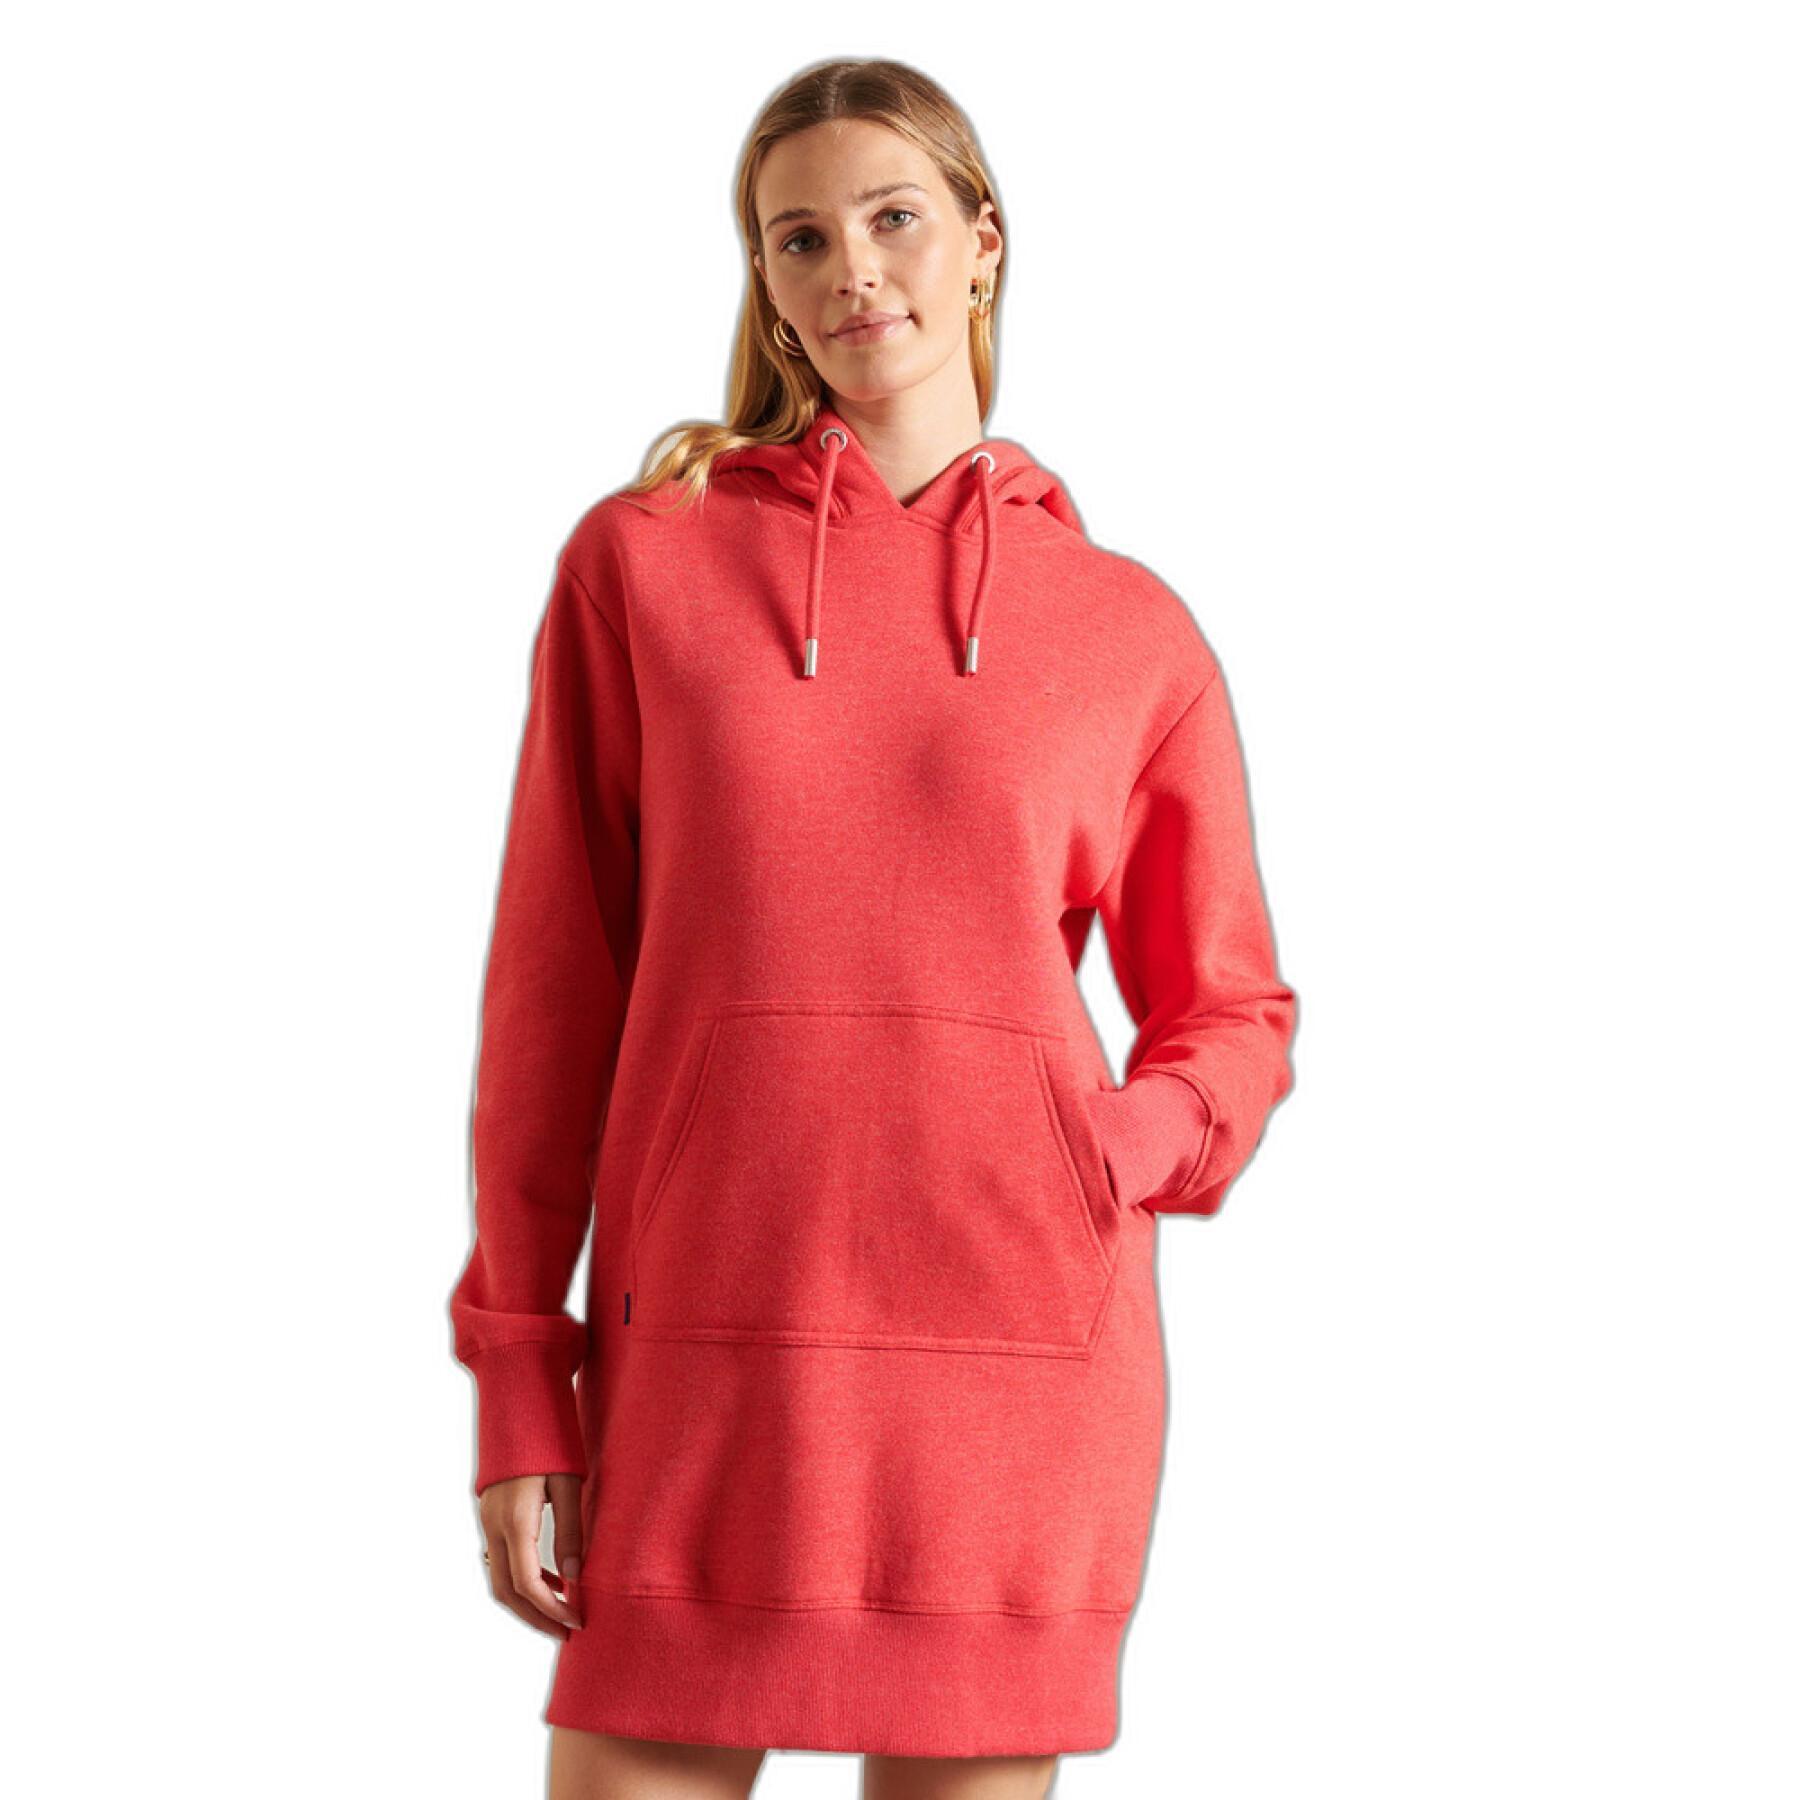 Vintage logo embroidered hoodie dress for women Superdry